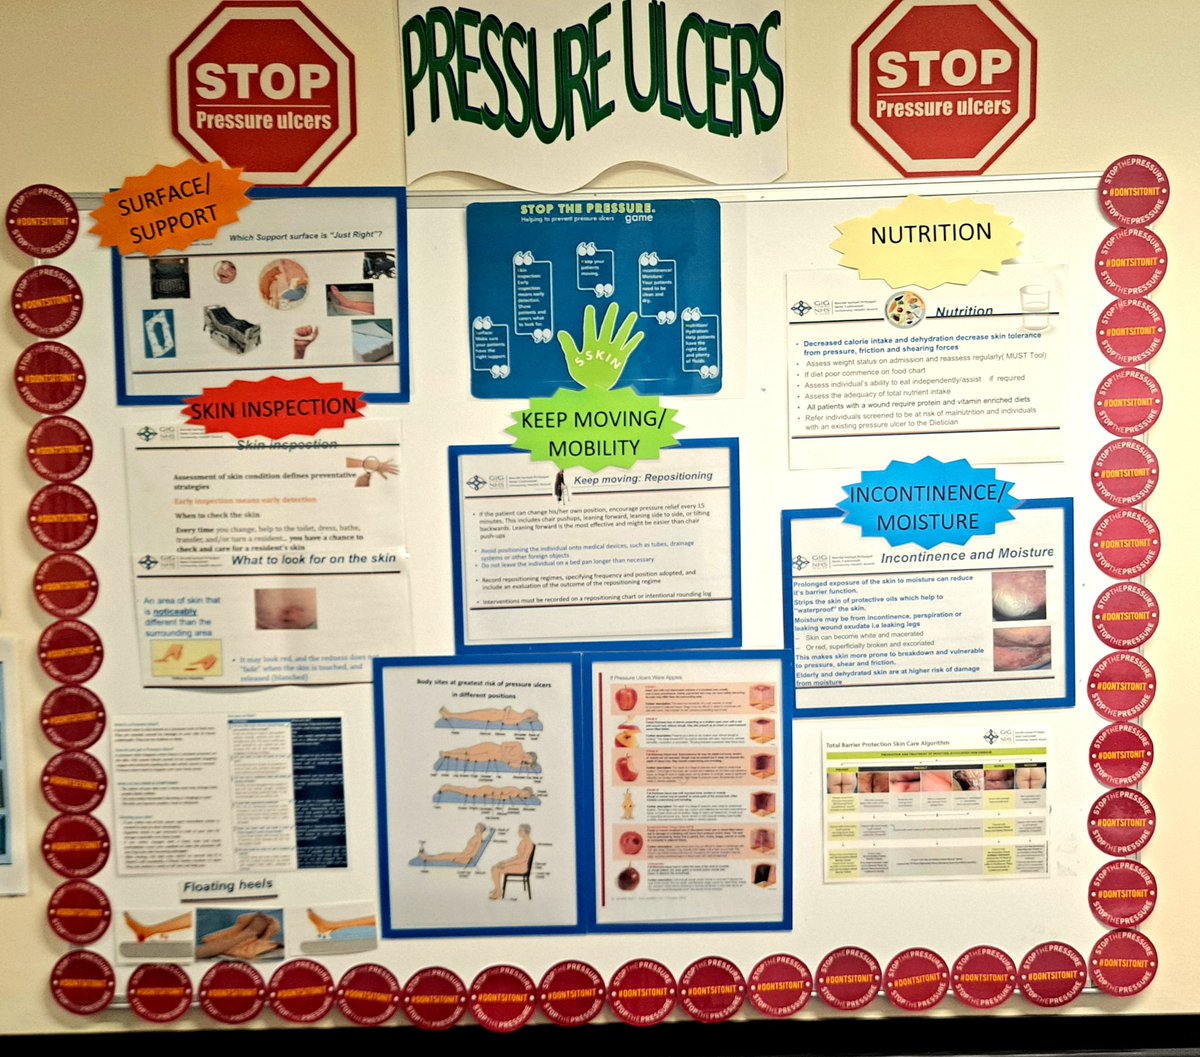 #StopThePressure 
Famau Ward topic board for November and December. Raising awareness of pressure ulcer prevention and management.
#tissueviability @lowe_hayj302 @NicholaHughes6 @hafodol @JULIEKELLY1 @annamar46017817